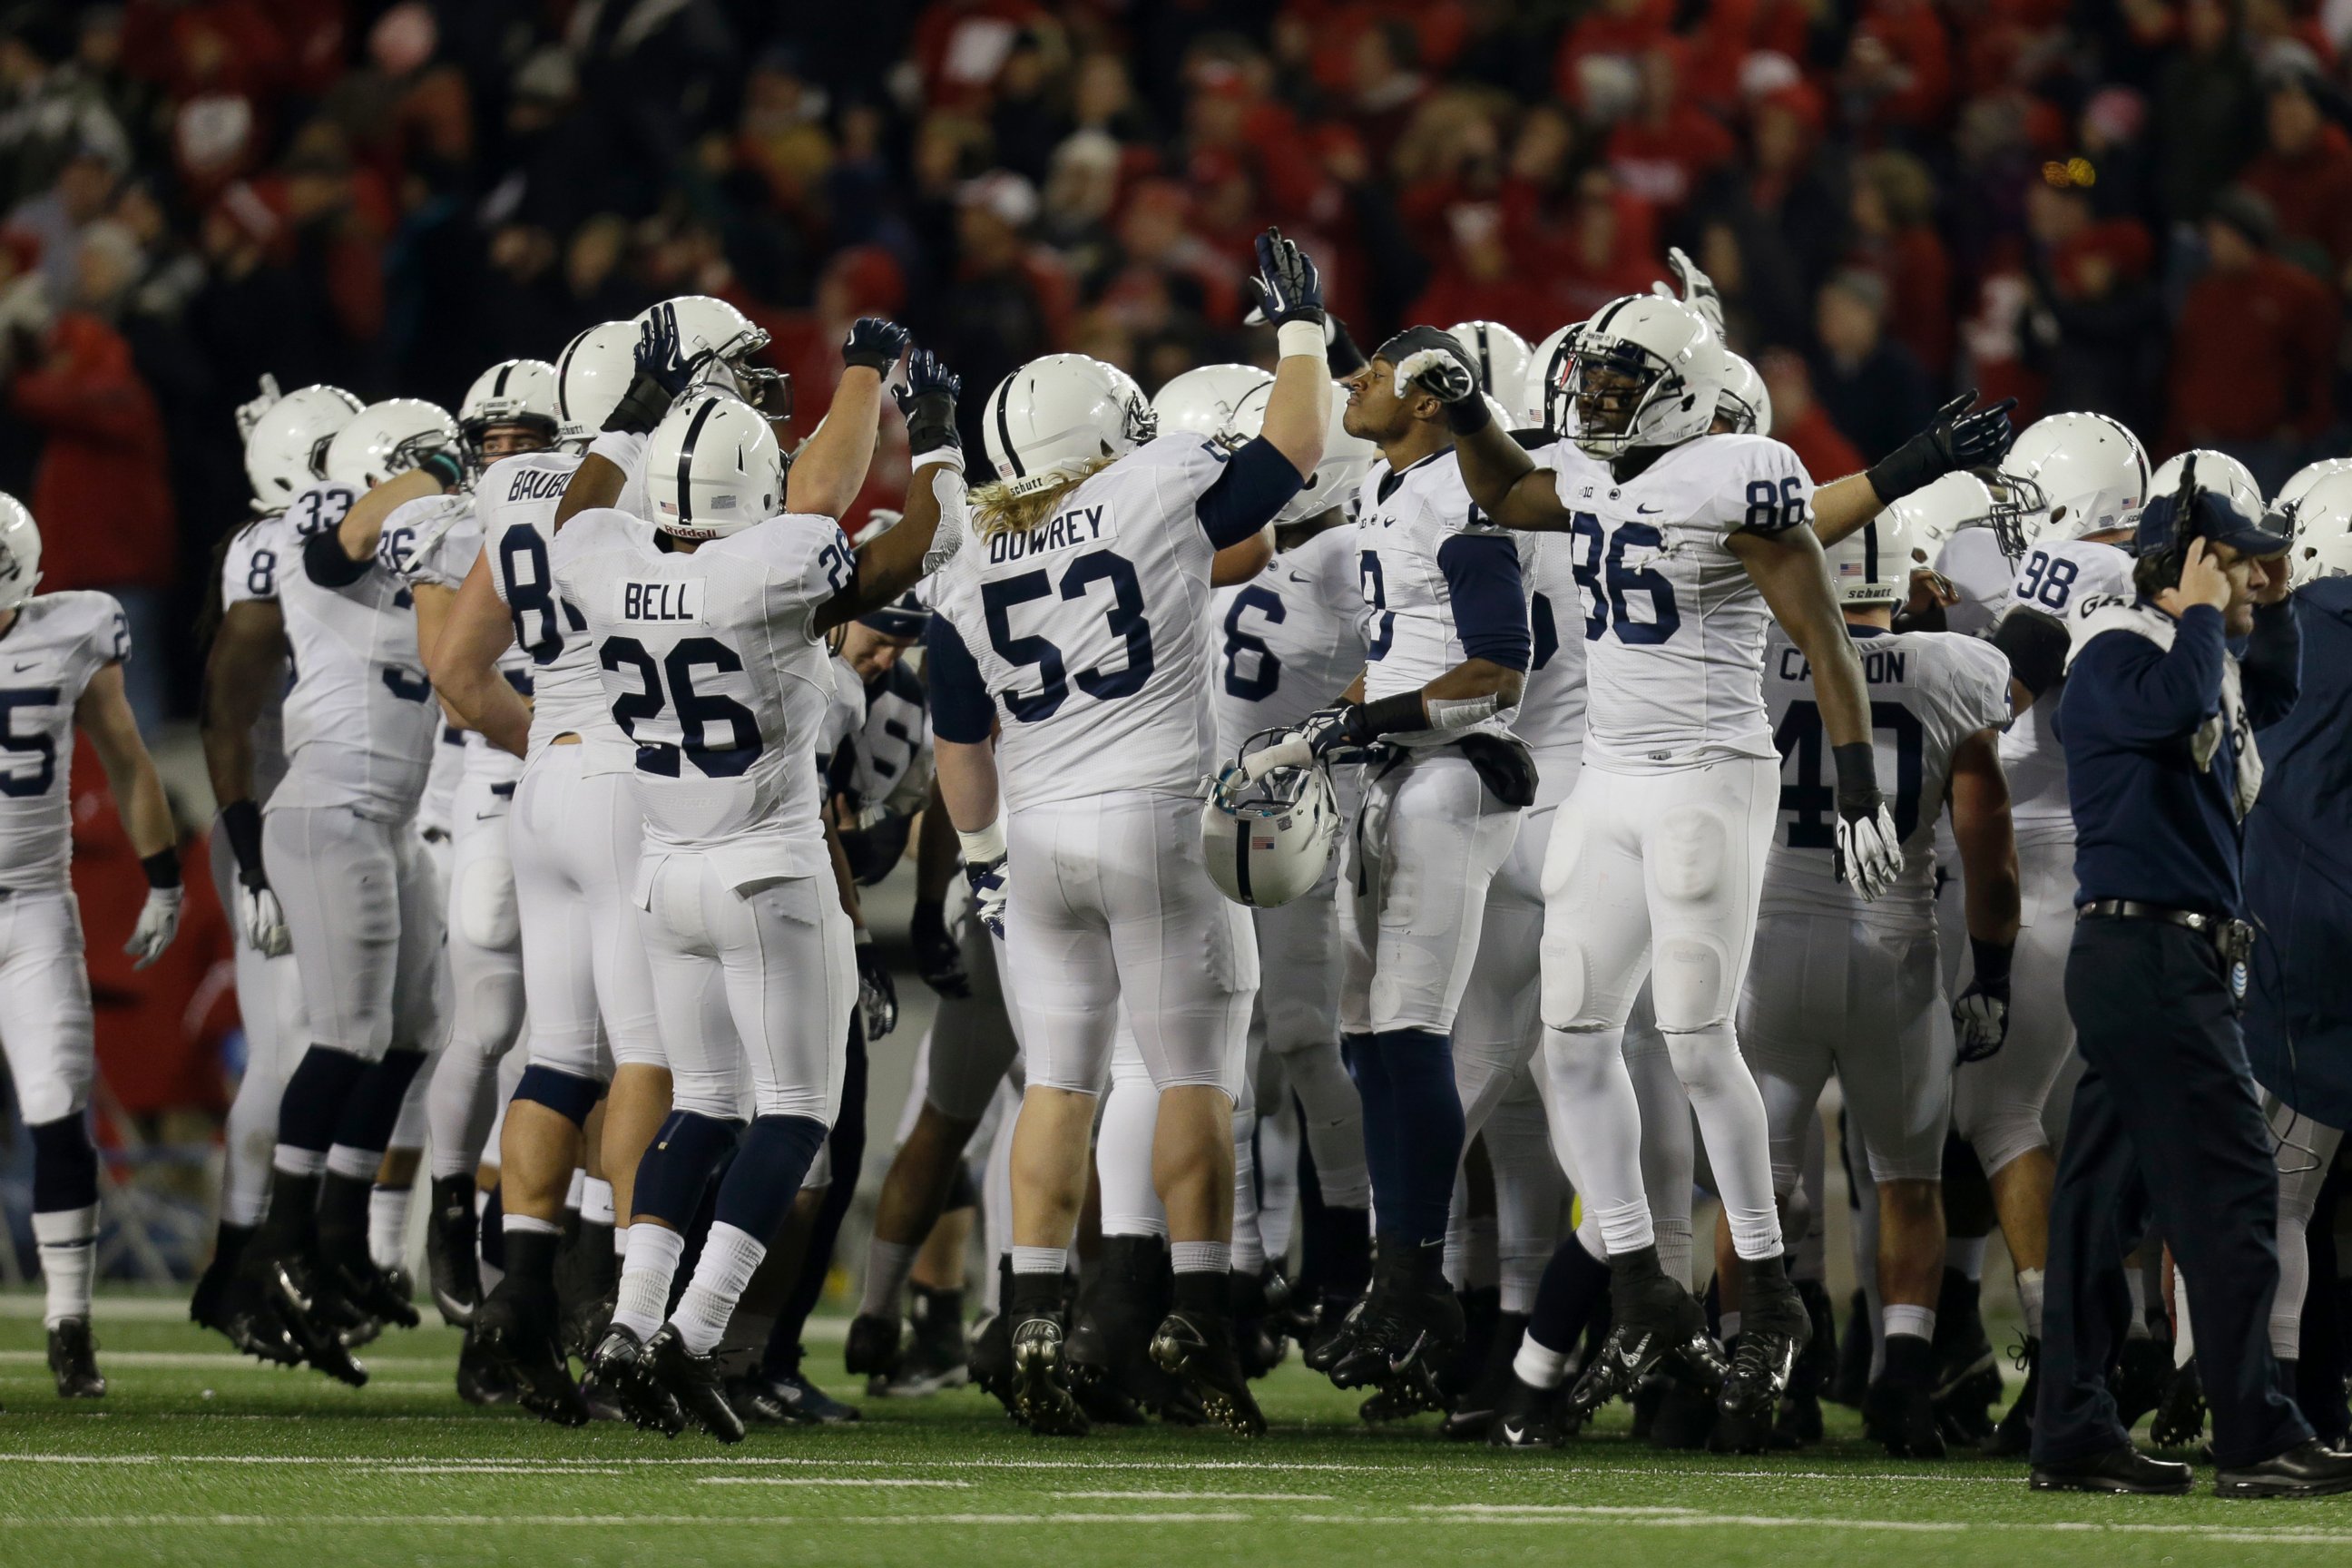 PHOTO: The Penn State Nittany Lions dance on the field during the playing of "Jump Around" during the game against the Wisconsin Badgers at Camp Randall Stadium on Nov. 30, 2013 in Madison, Wis.